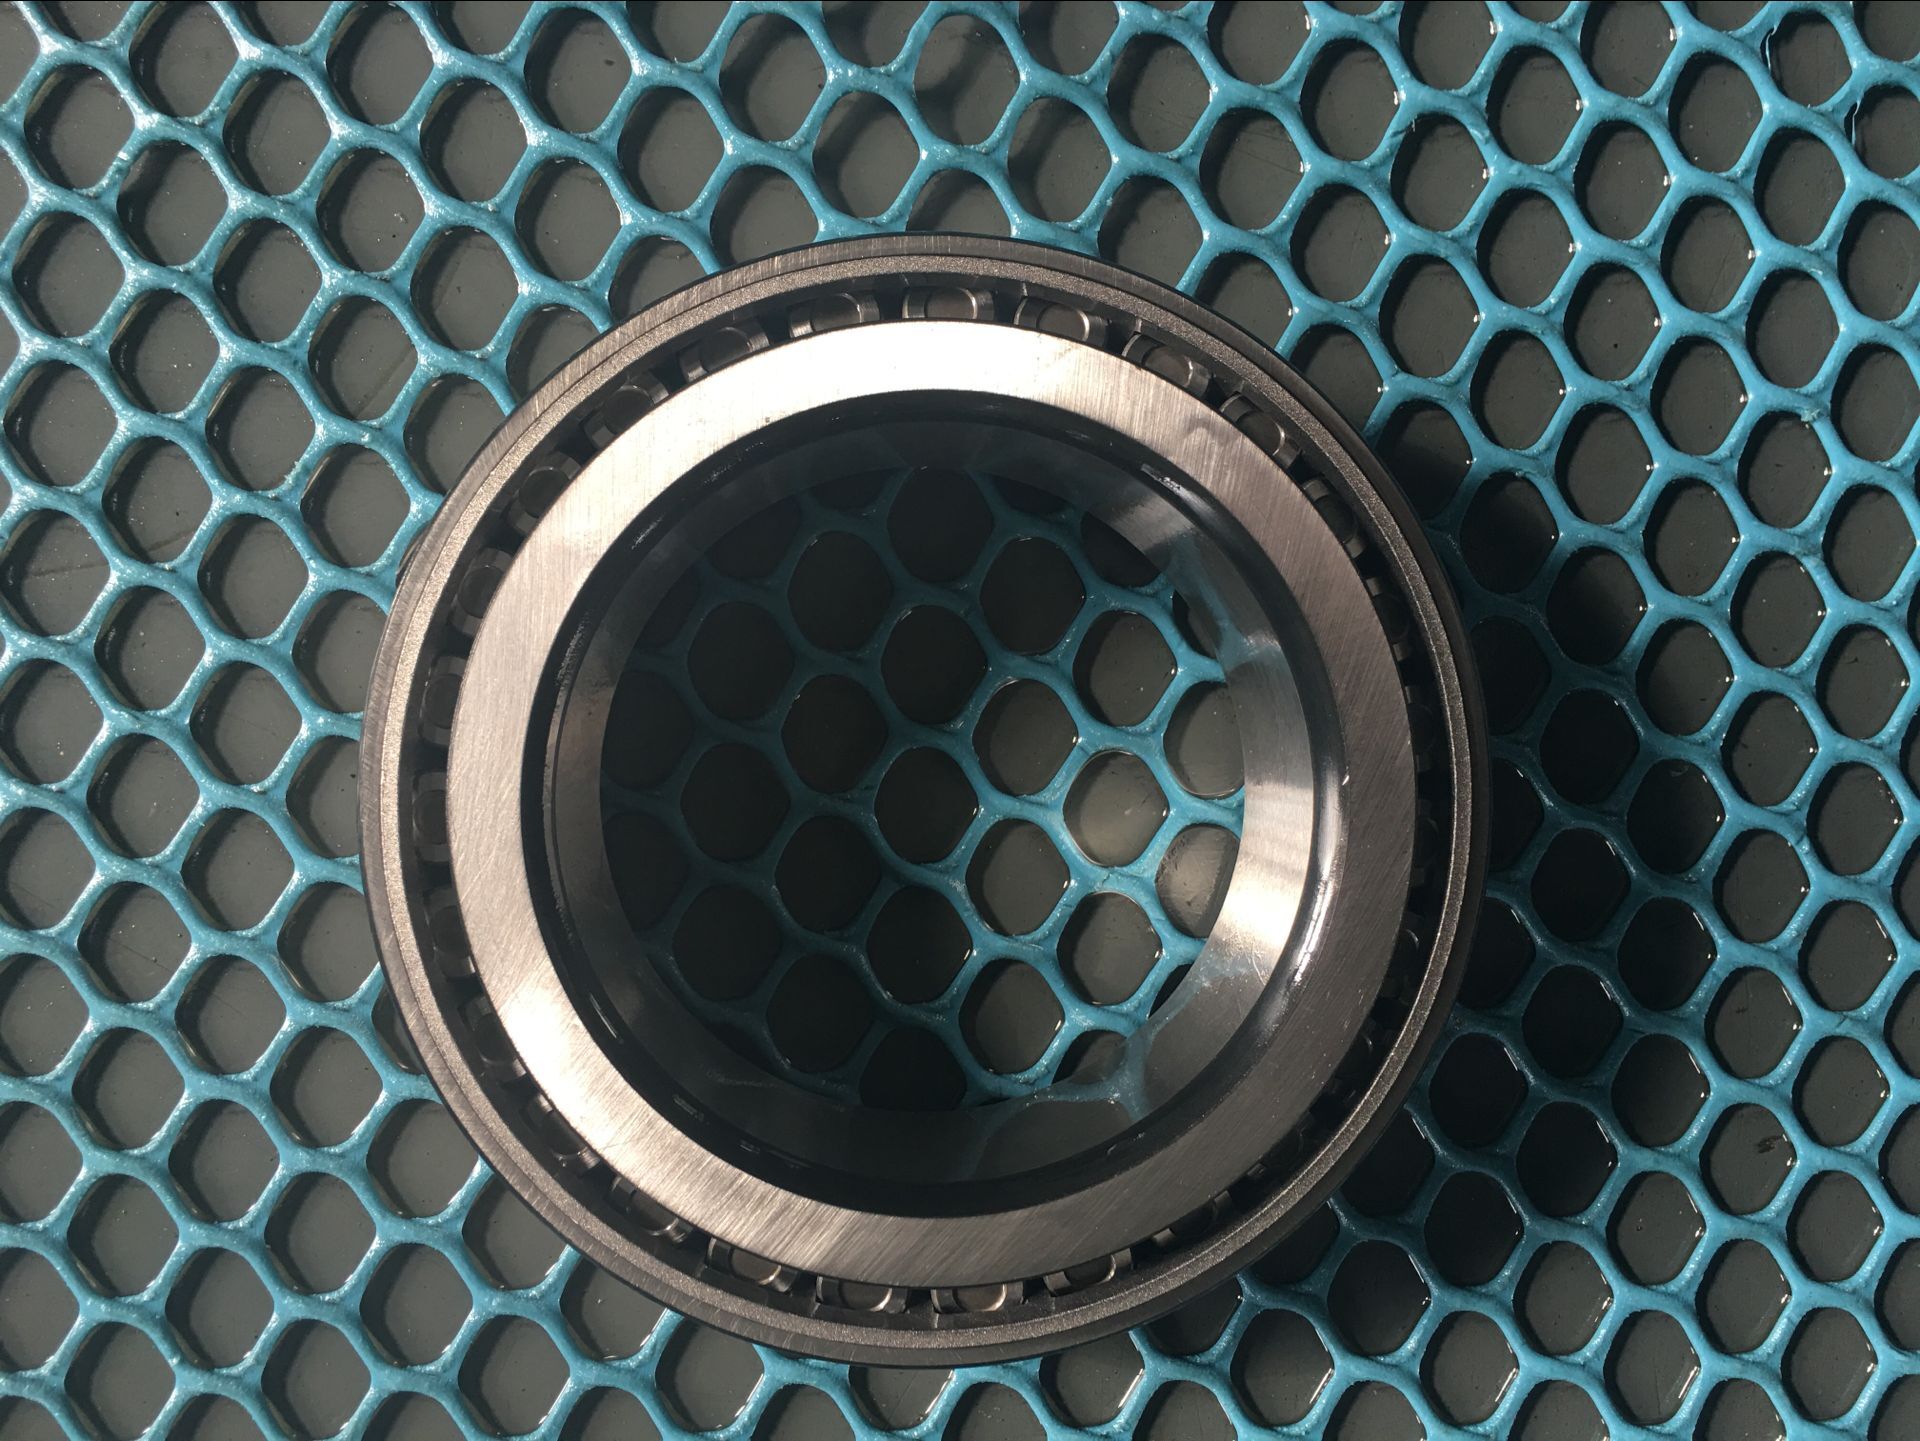 Russia GOST 520-2011 Taper Roller Bearing 2007132 2007134 2007136 2007138 2007140 2007144 2007148 2007152 2007156 2007160 2007164